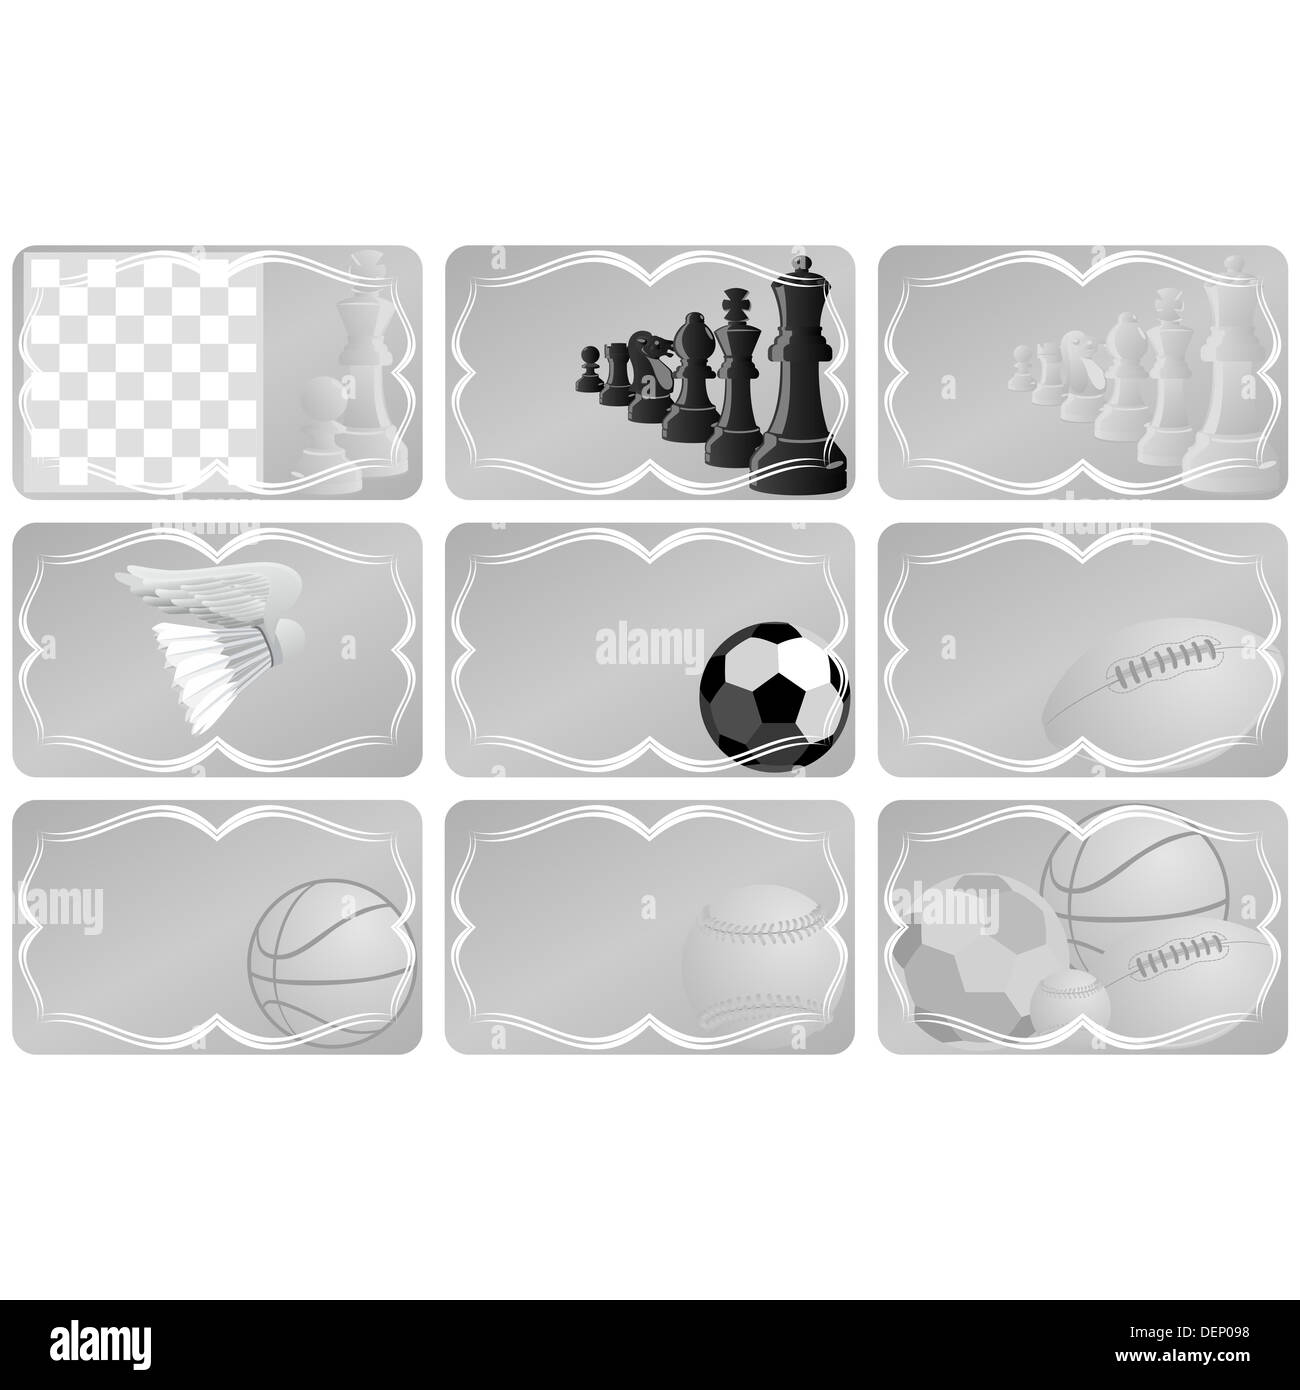 A business card with a picture of sports equipment. The illustration on a white background. Stock Photo